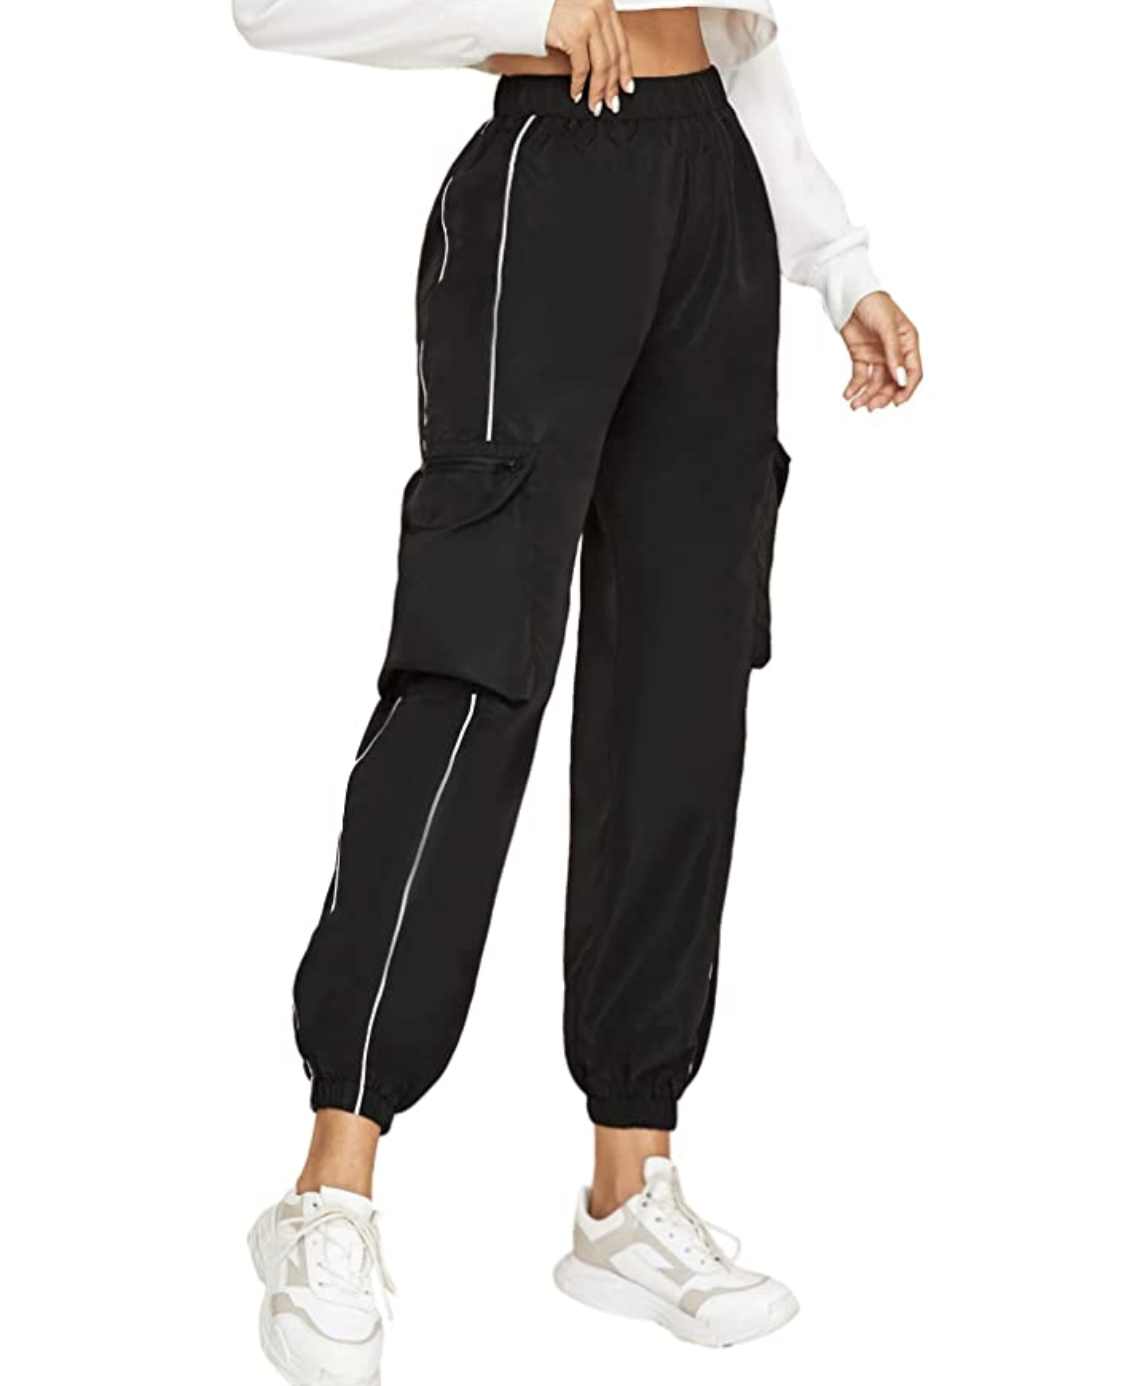 Milumia Womens Casual Elastic High Waist Crop Cargo Jogger Sport Pant with Pocket 